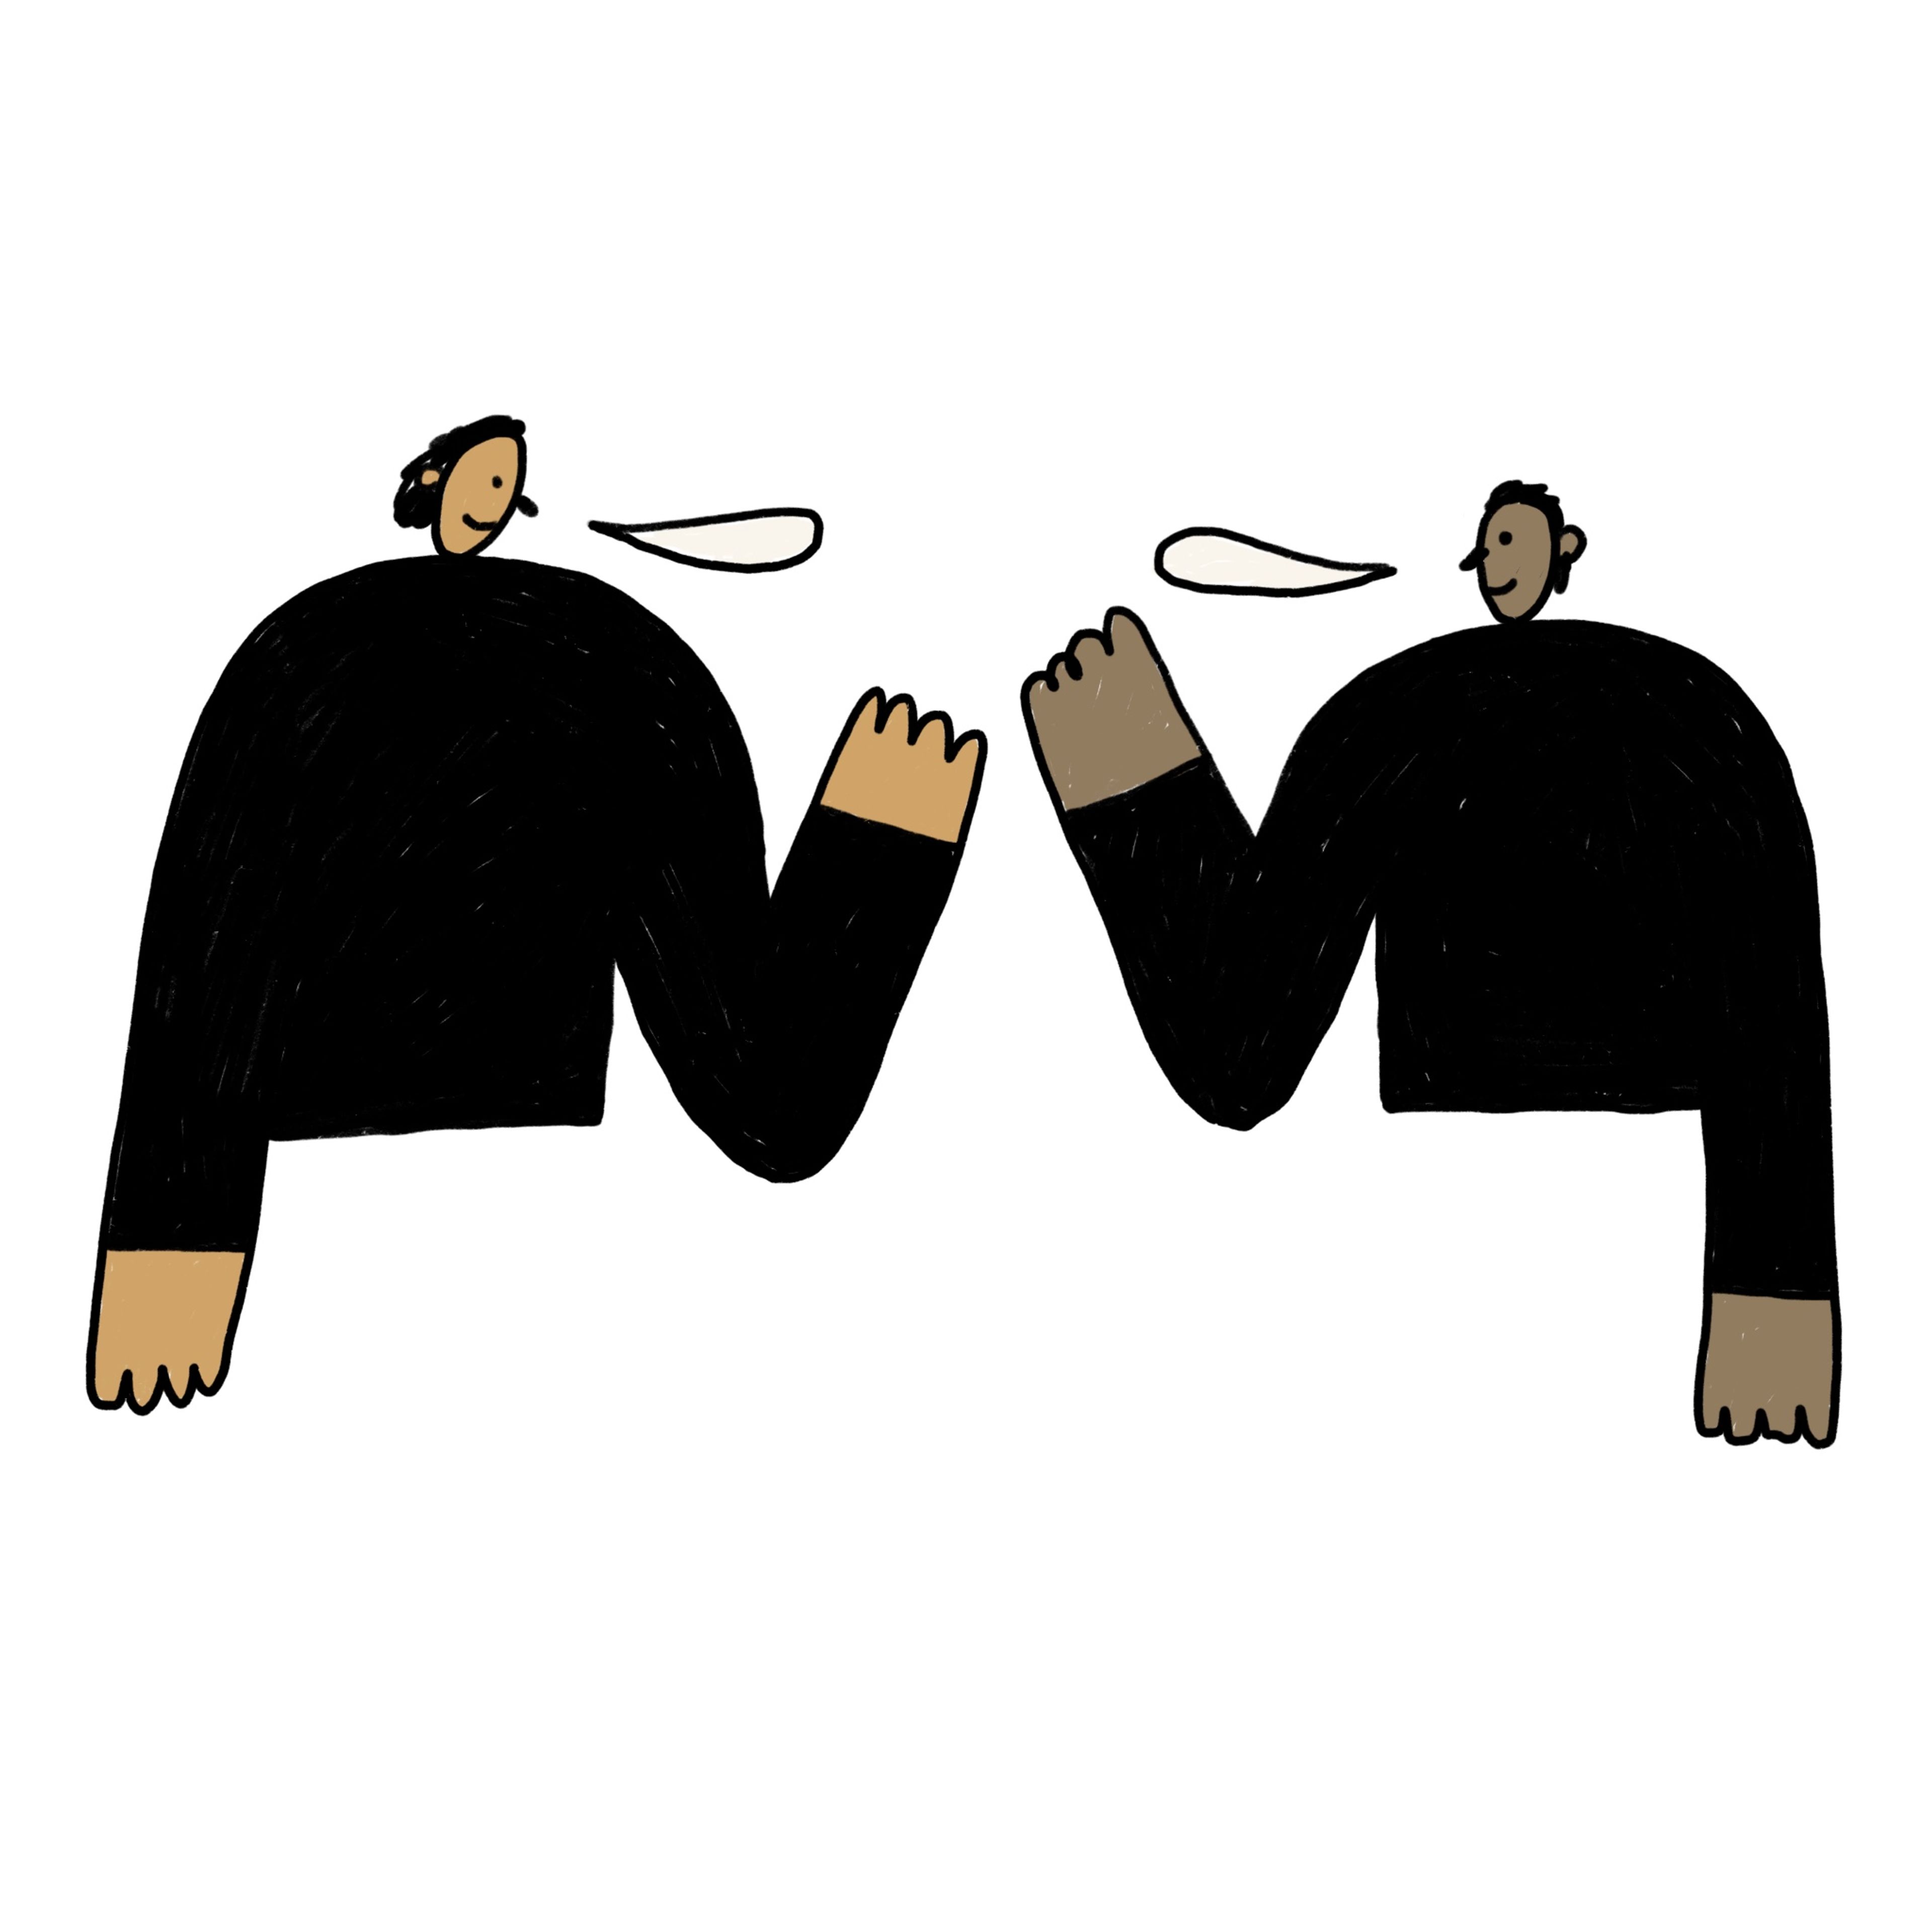 Illustration of two figures speaking to each other.